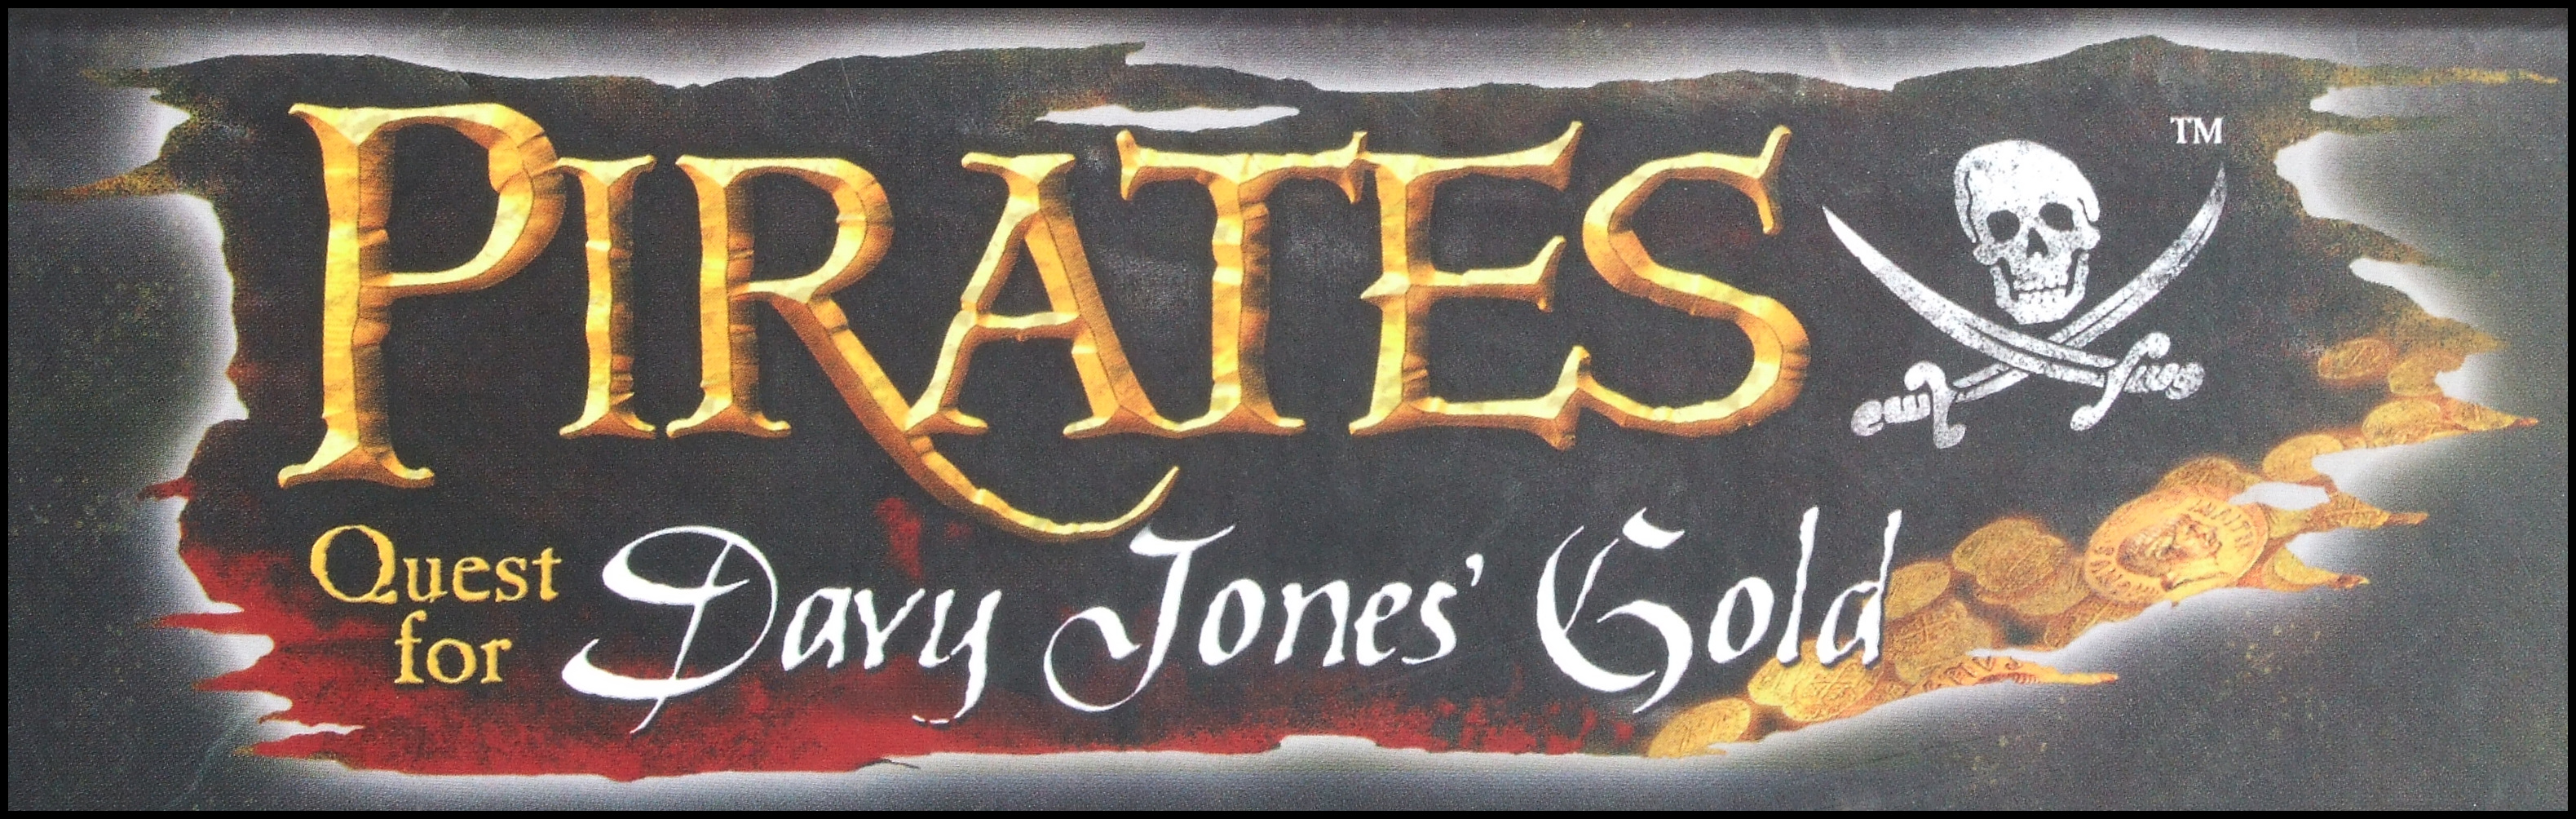 Pirates Quest For Davy Jones' Gold Board Game - Game Logo